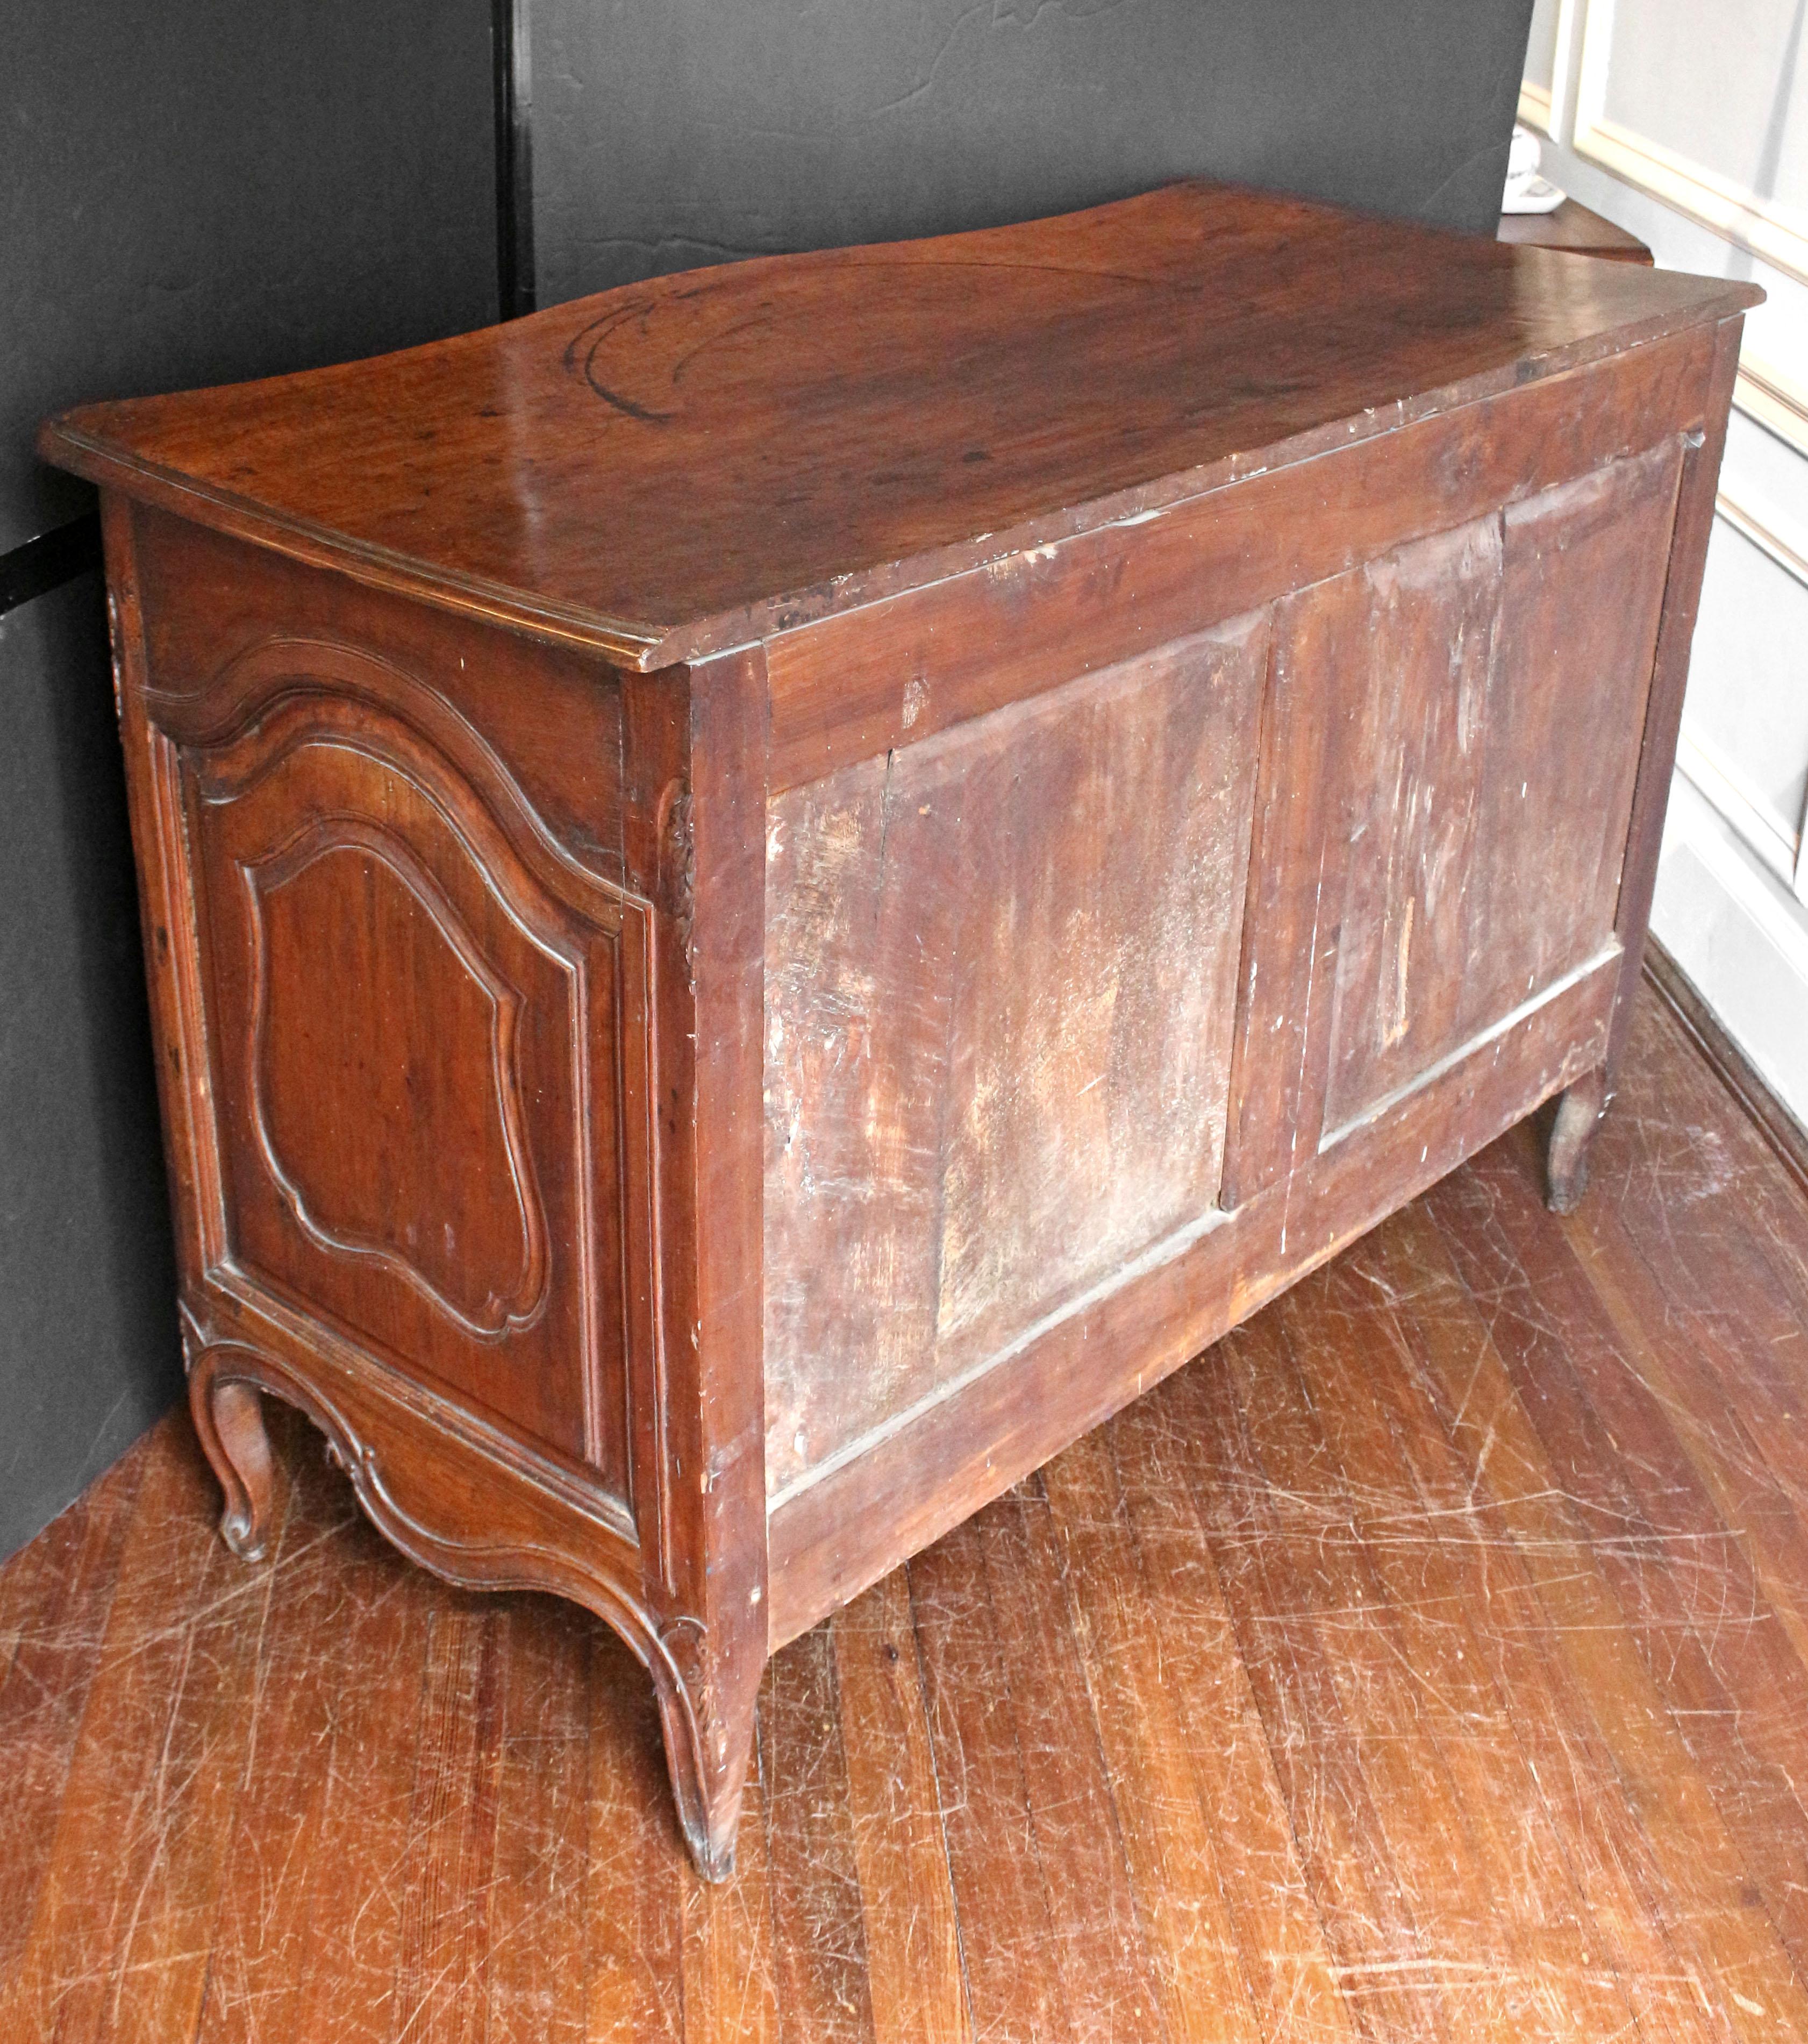 Circa 1735-55 French Rococo Period Commode from Provence For Sale 10